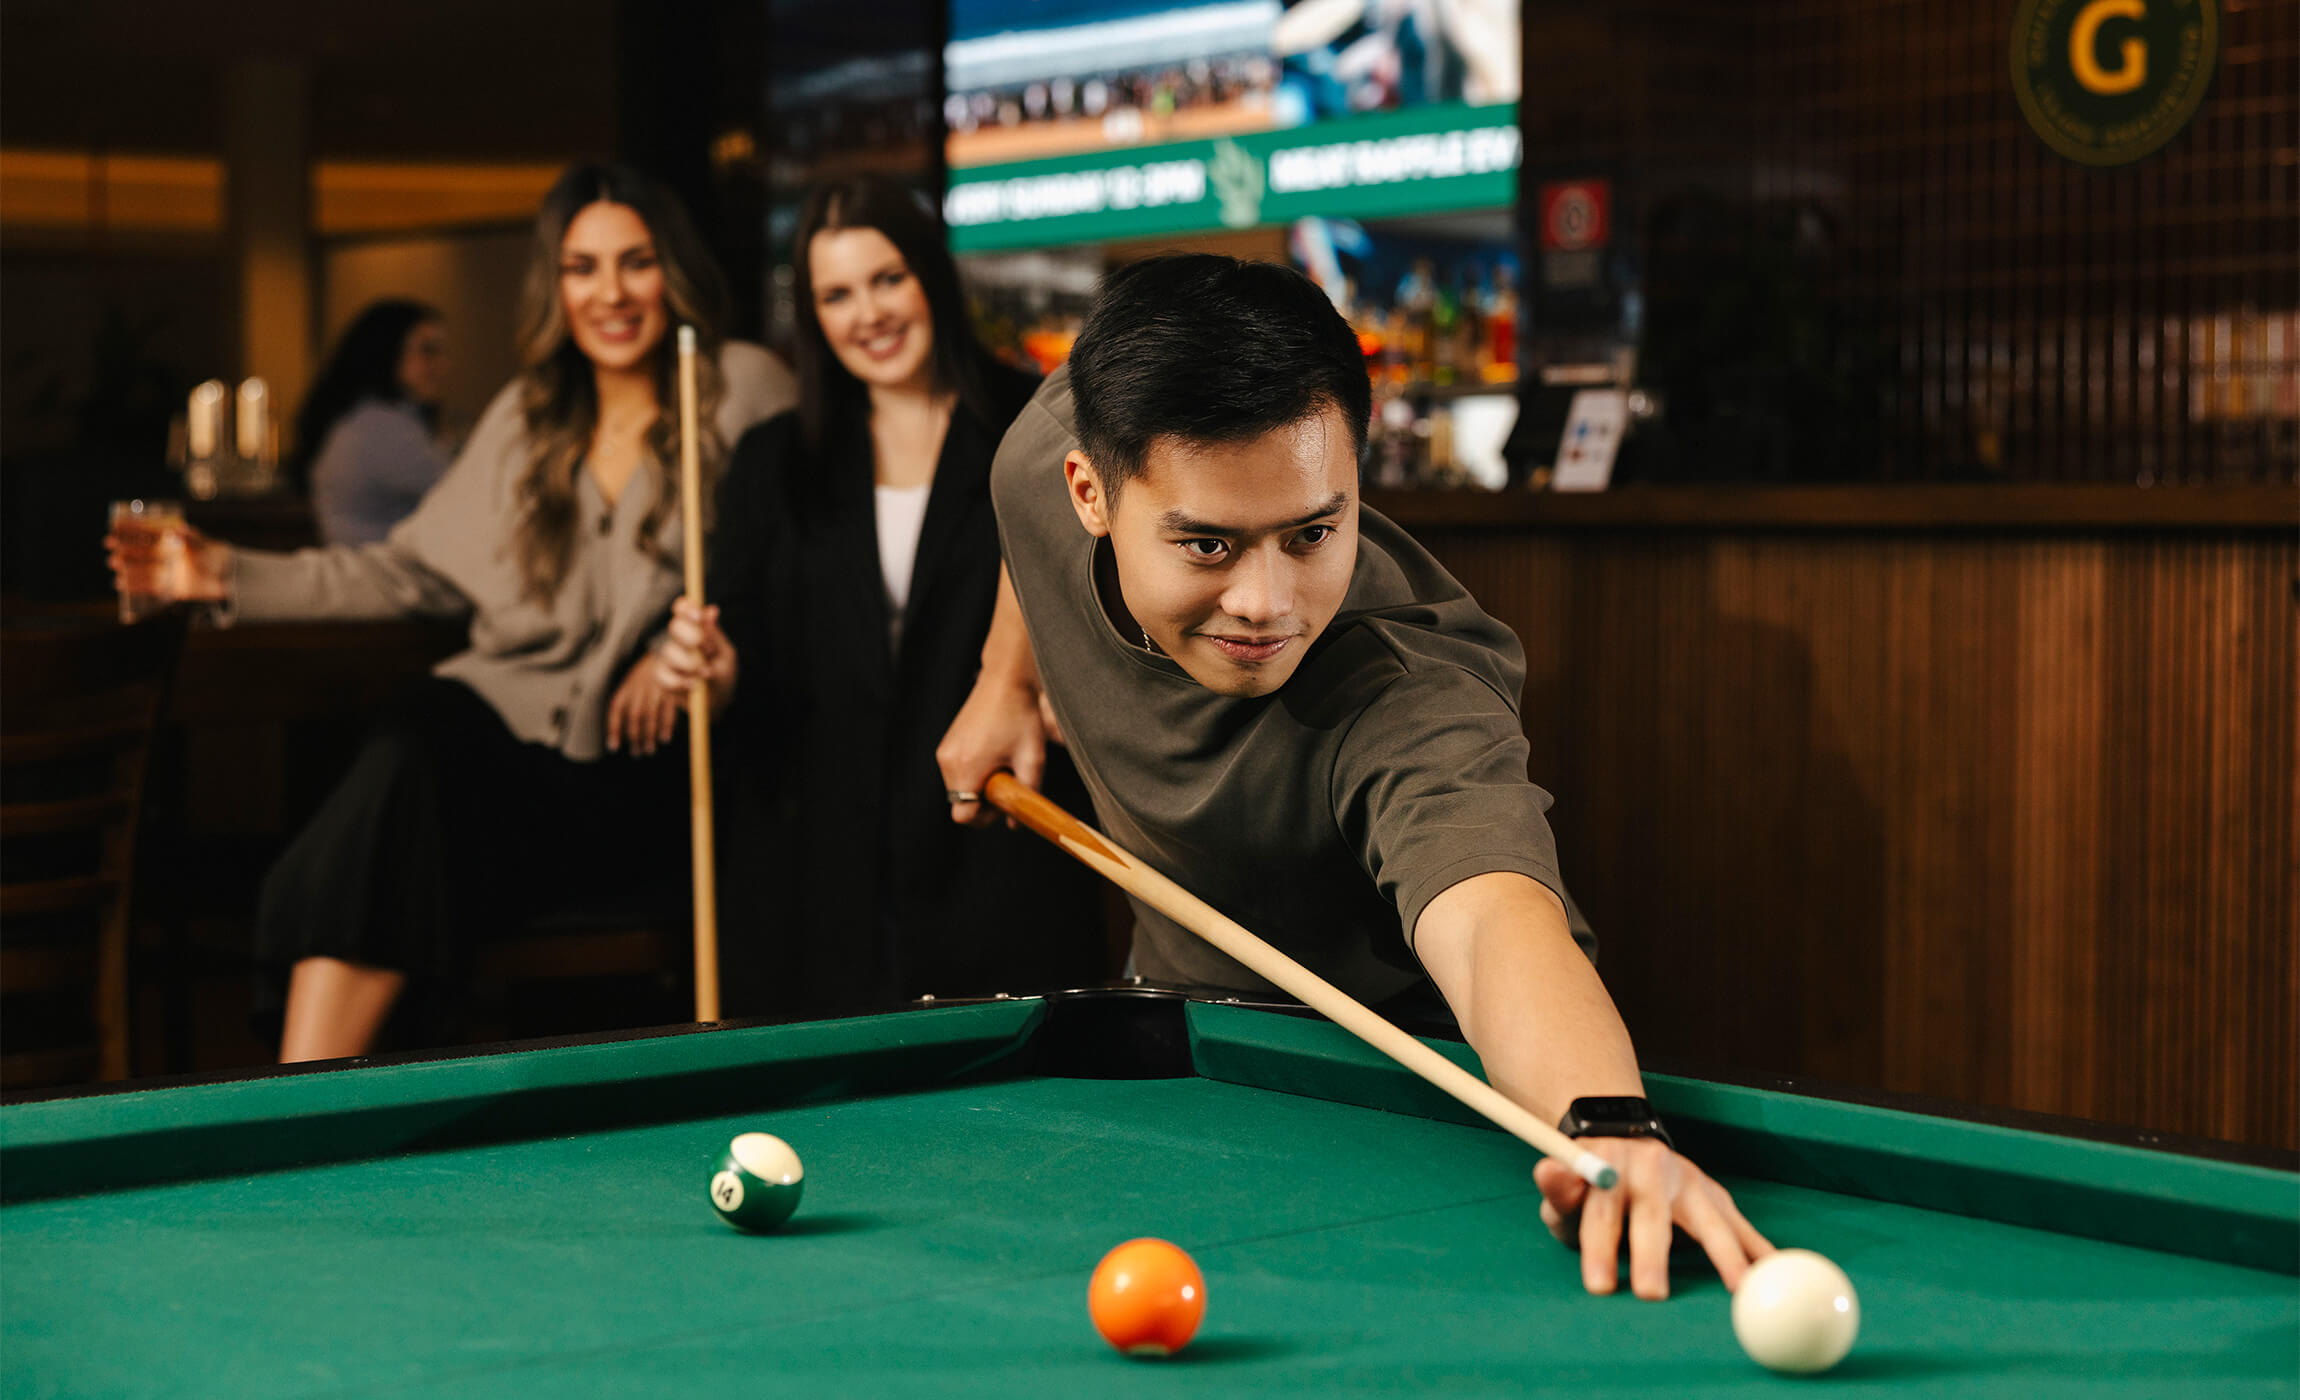 A group of young friends having a great time playing pool in a lively bar.